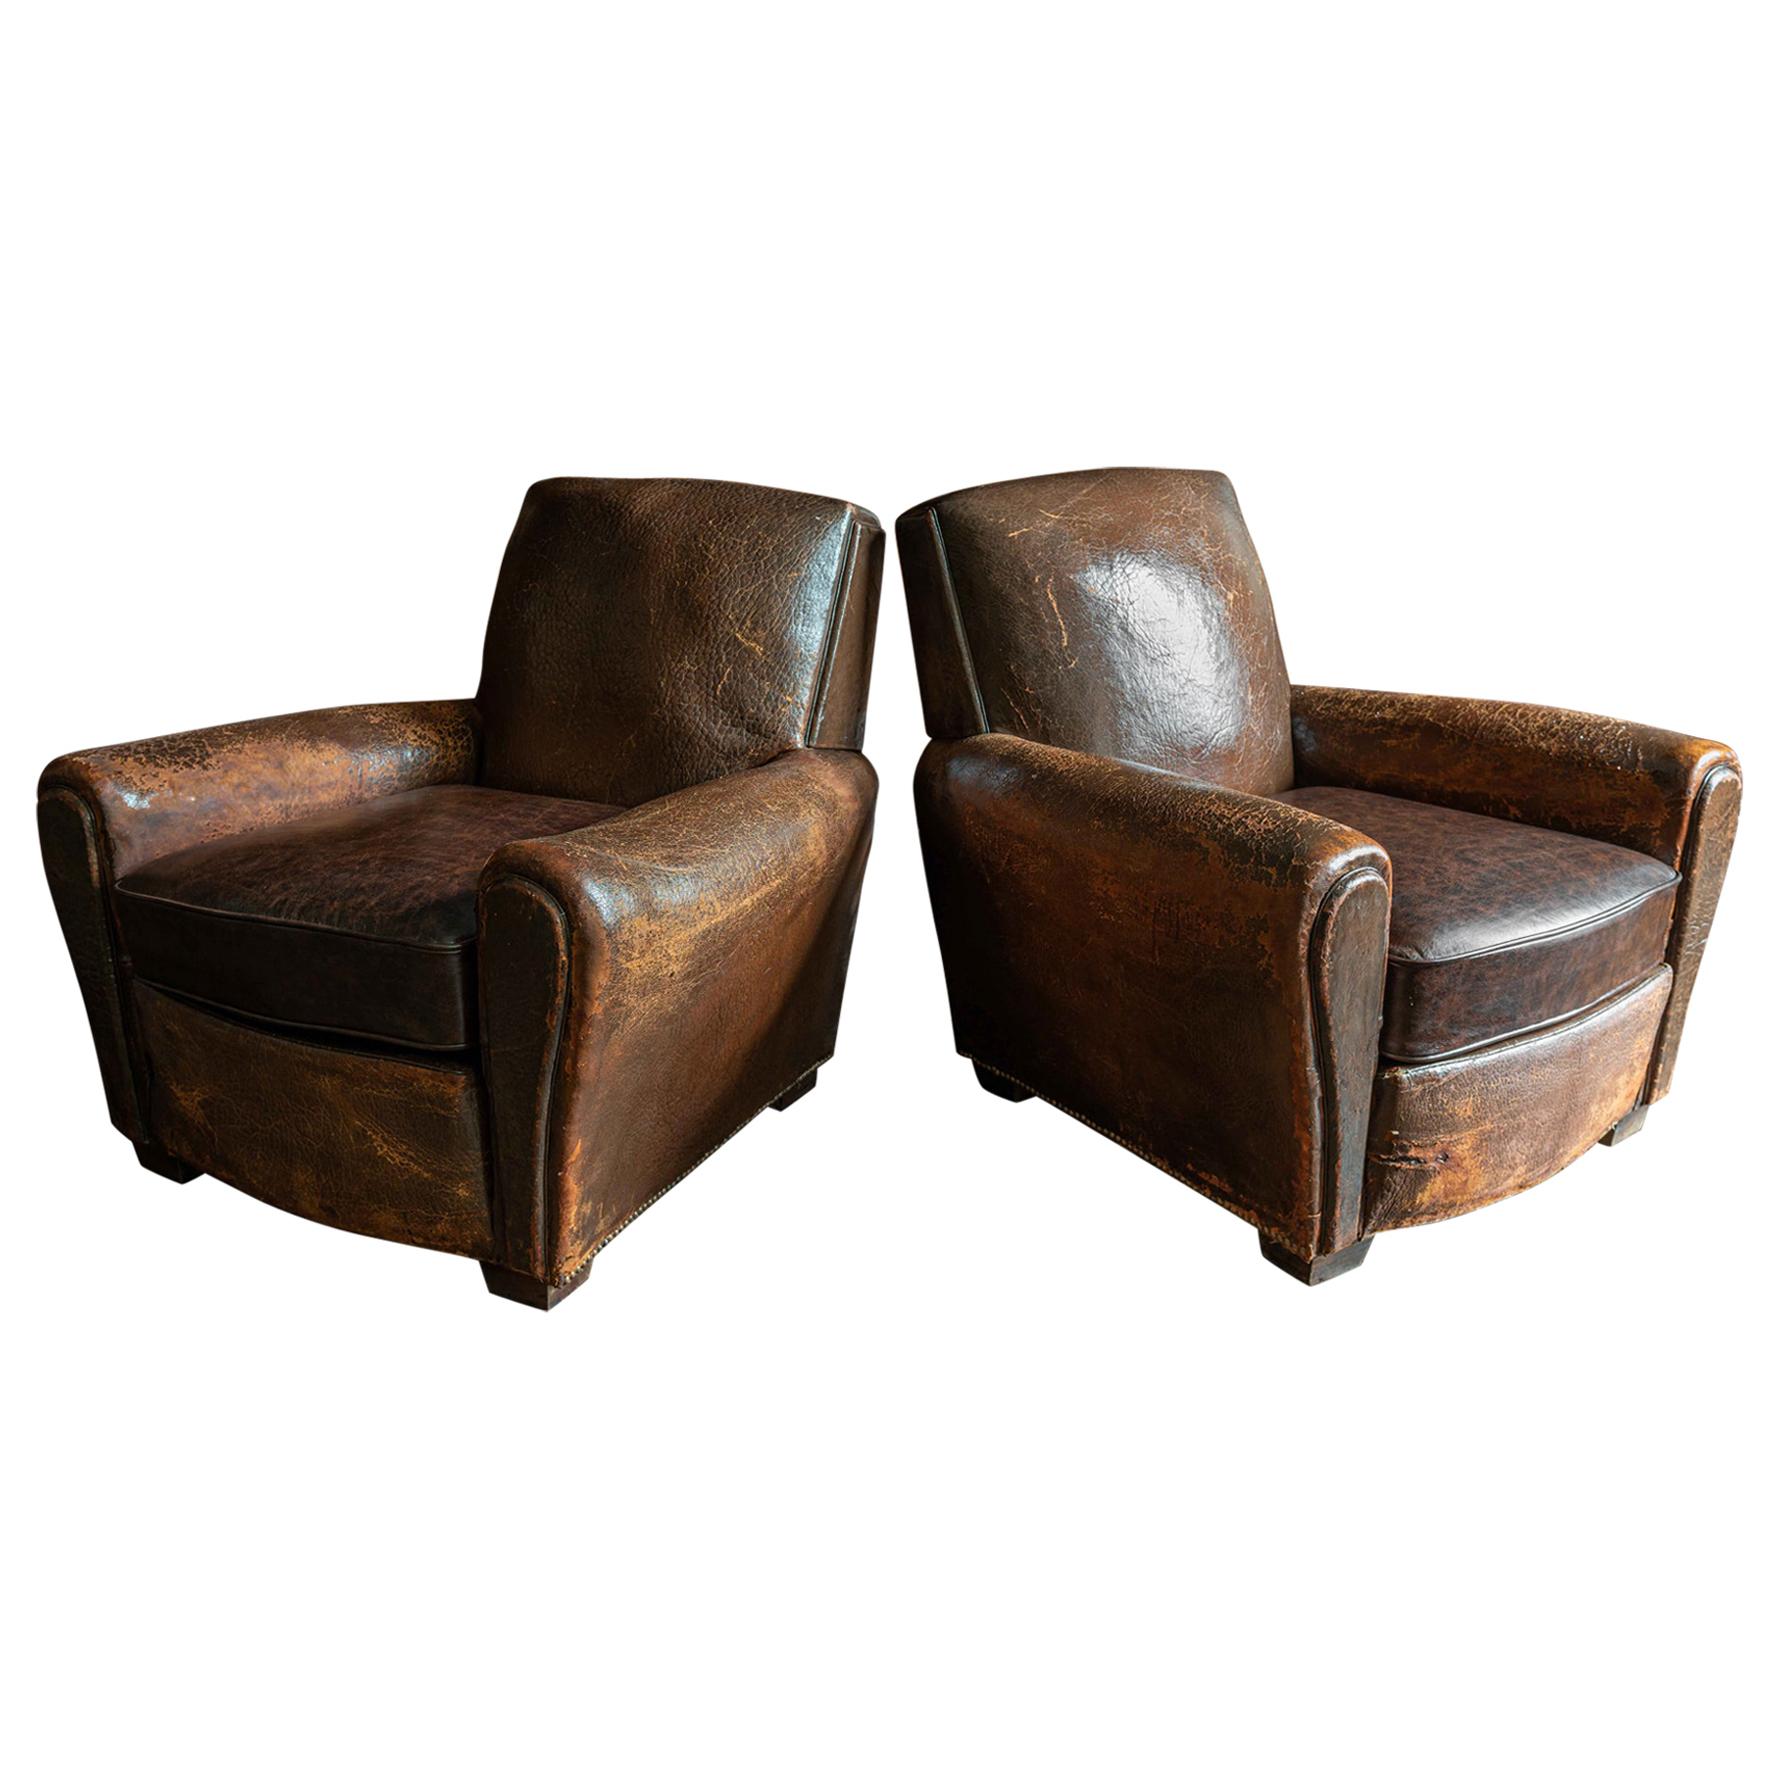 Pair of French Cigar Brown Leather Club Chairs, circa 1940